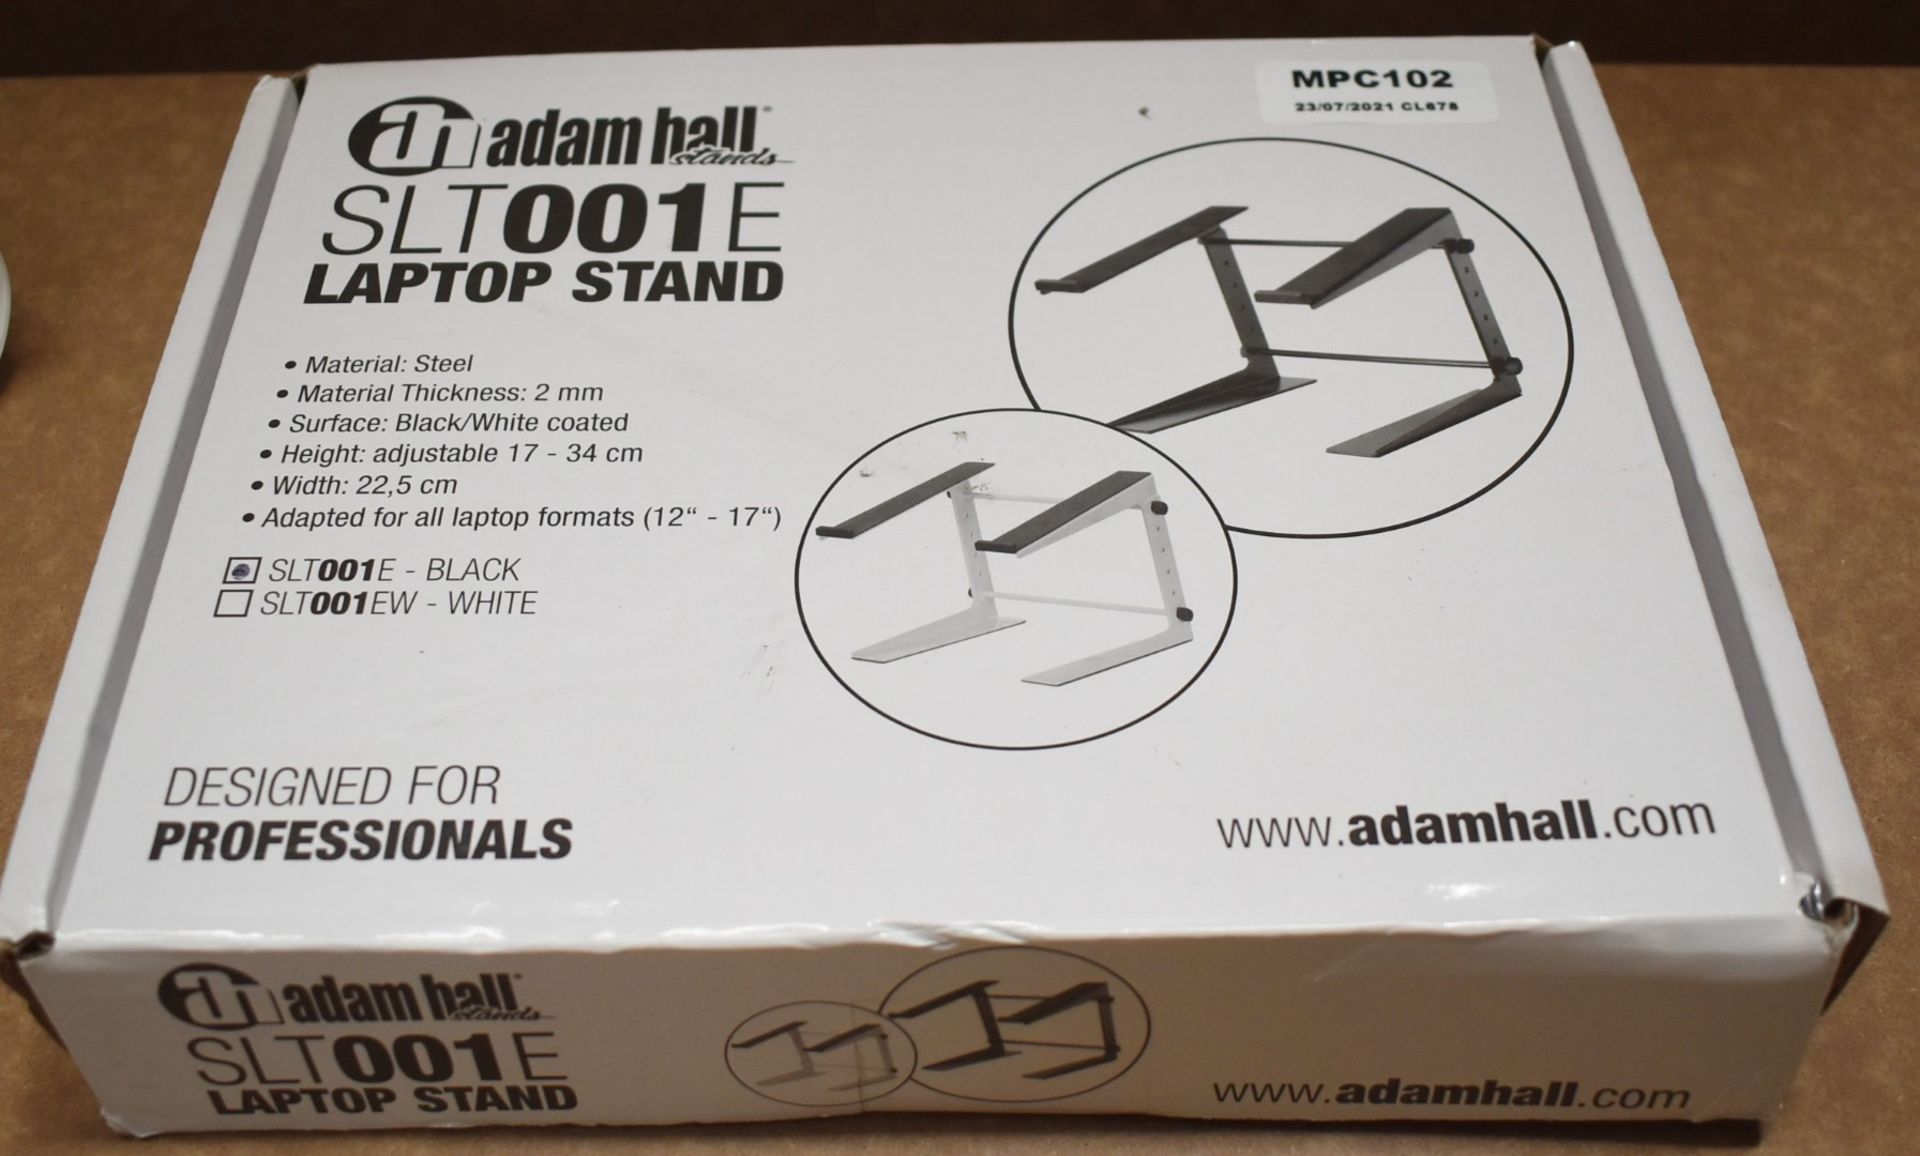 1 x Adam Hall Laptop Stand in Black - New and Boxed - Suitable For 12" - 17" Laptop Formats Type - Image 2 of 5